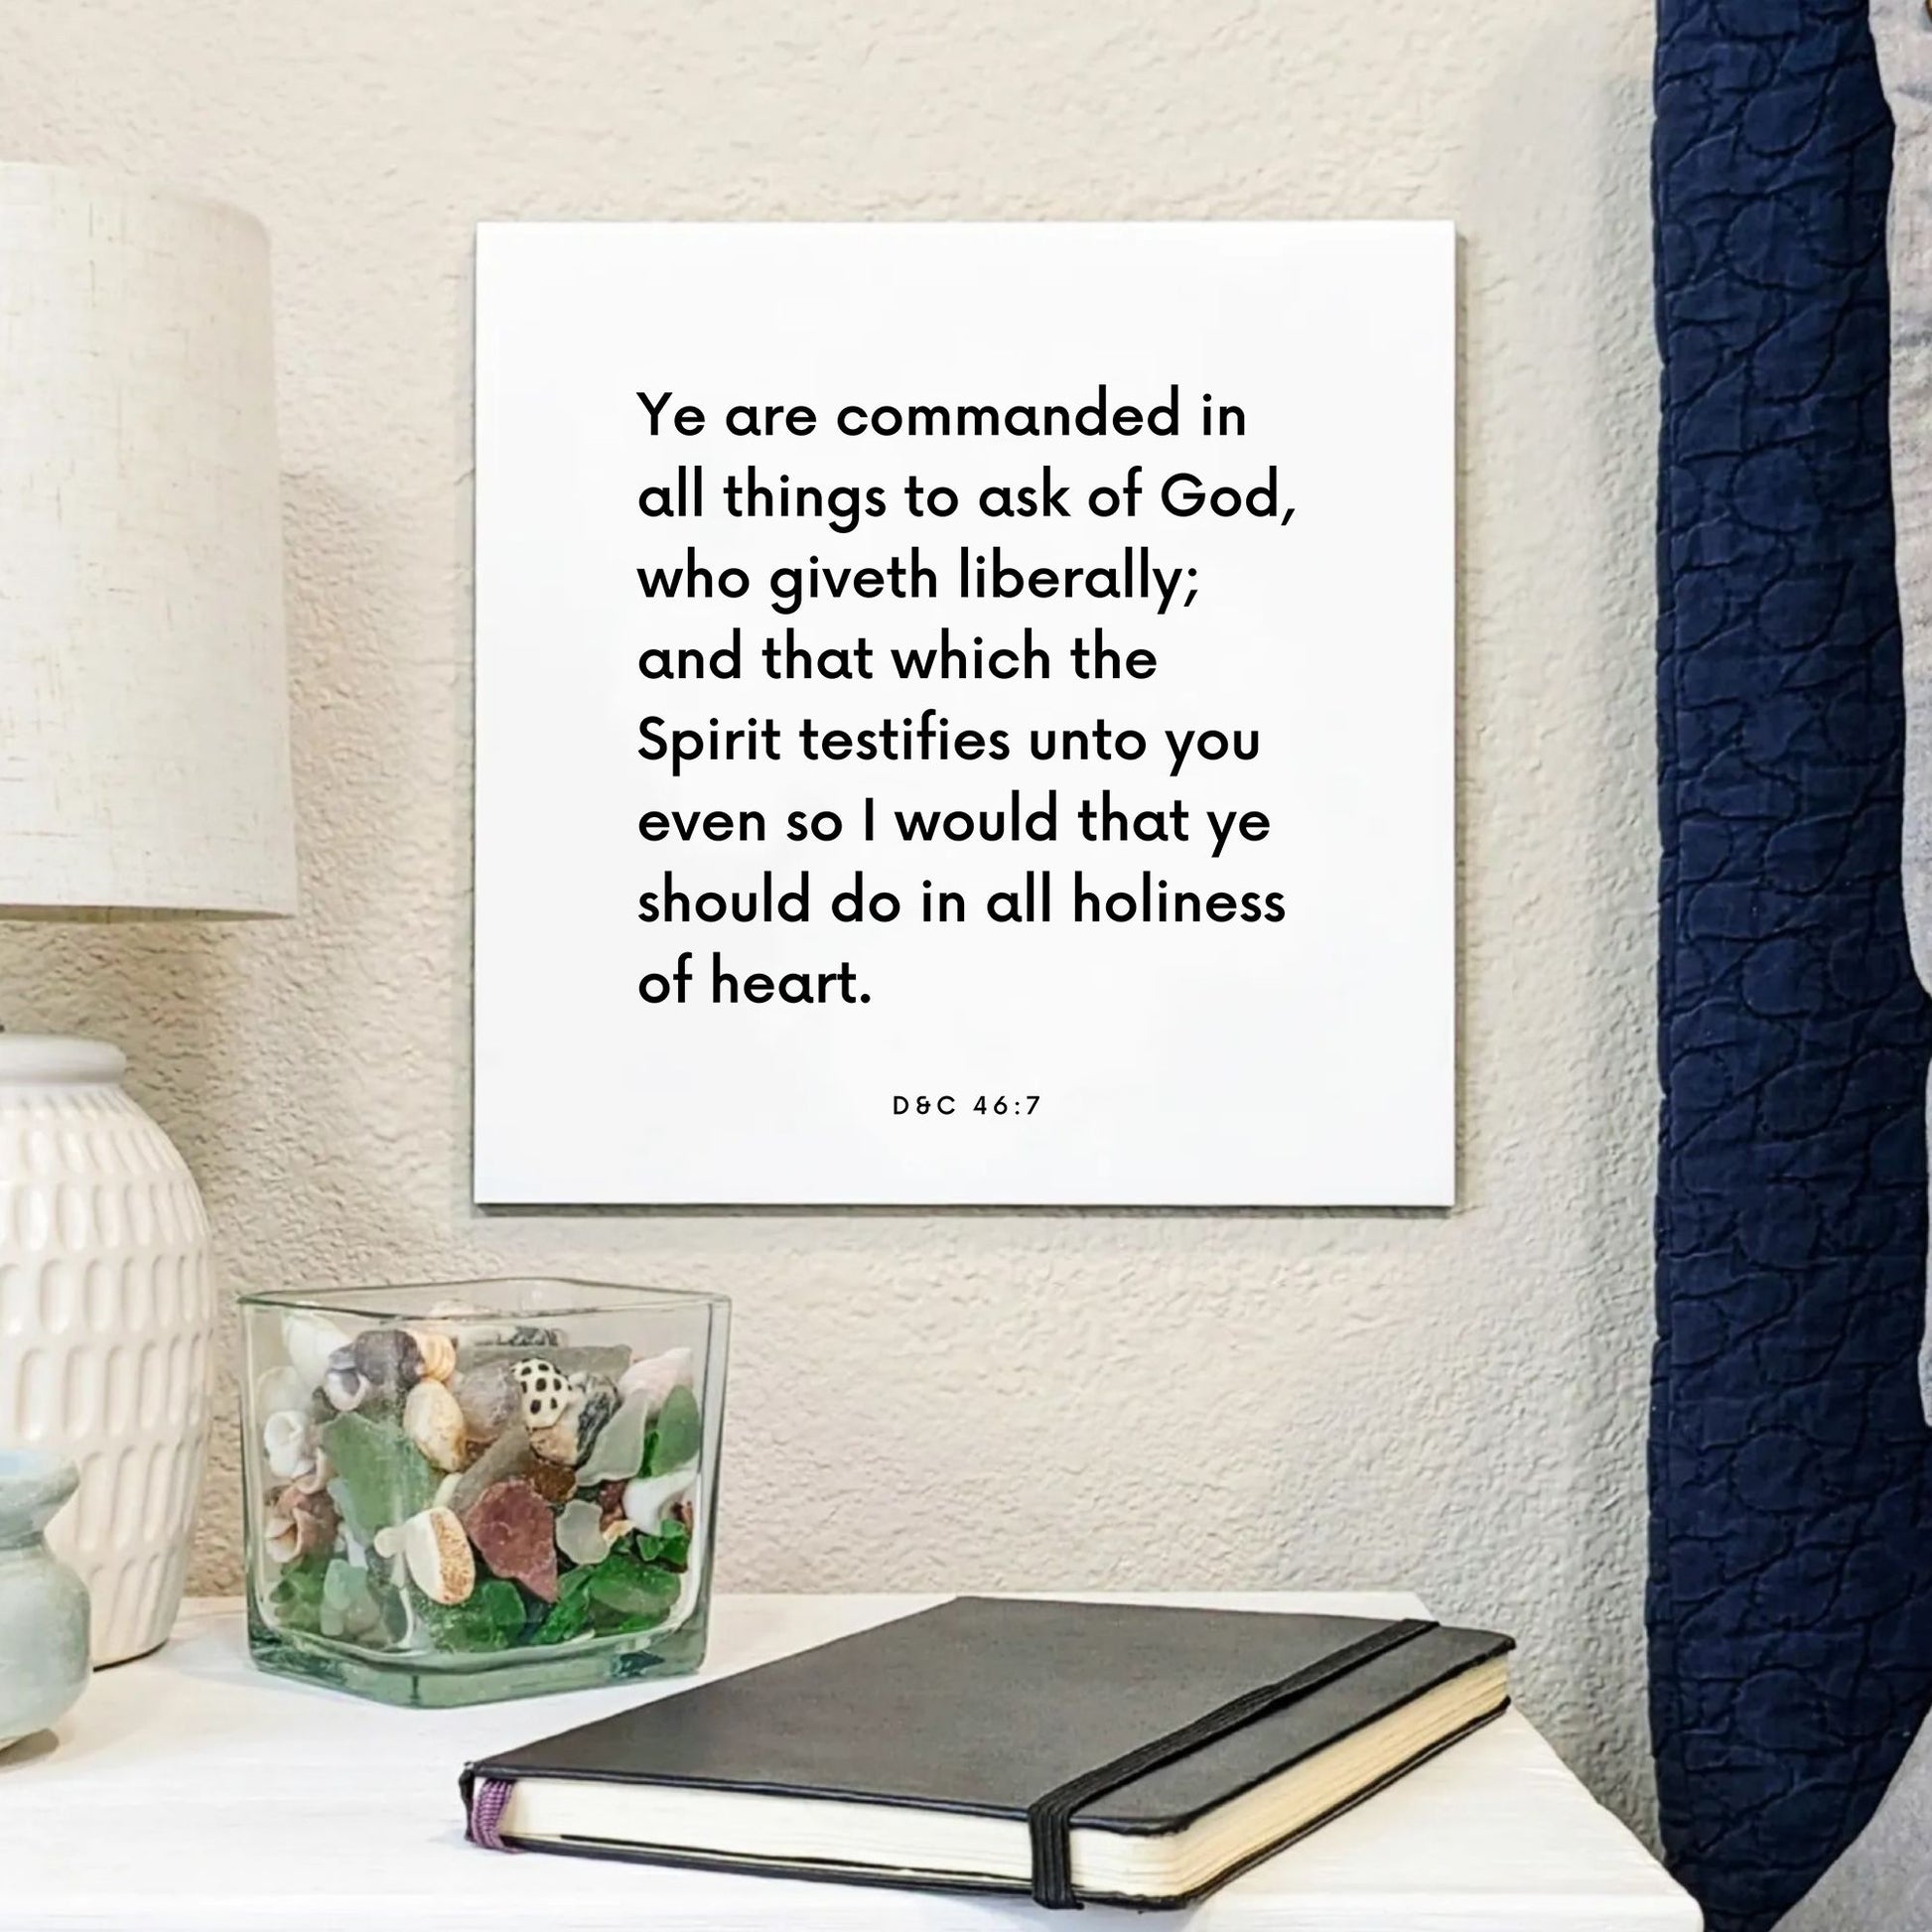 Bedside mouting of the scripture tile for D&C 46:7 - "Ye are commanded in all things to ask of God"